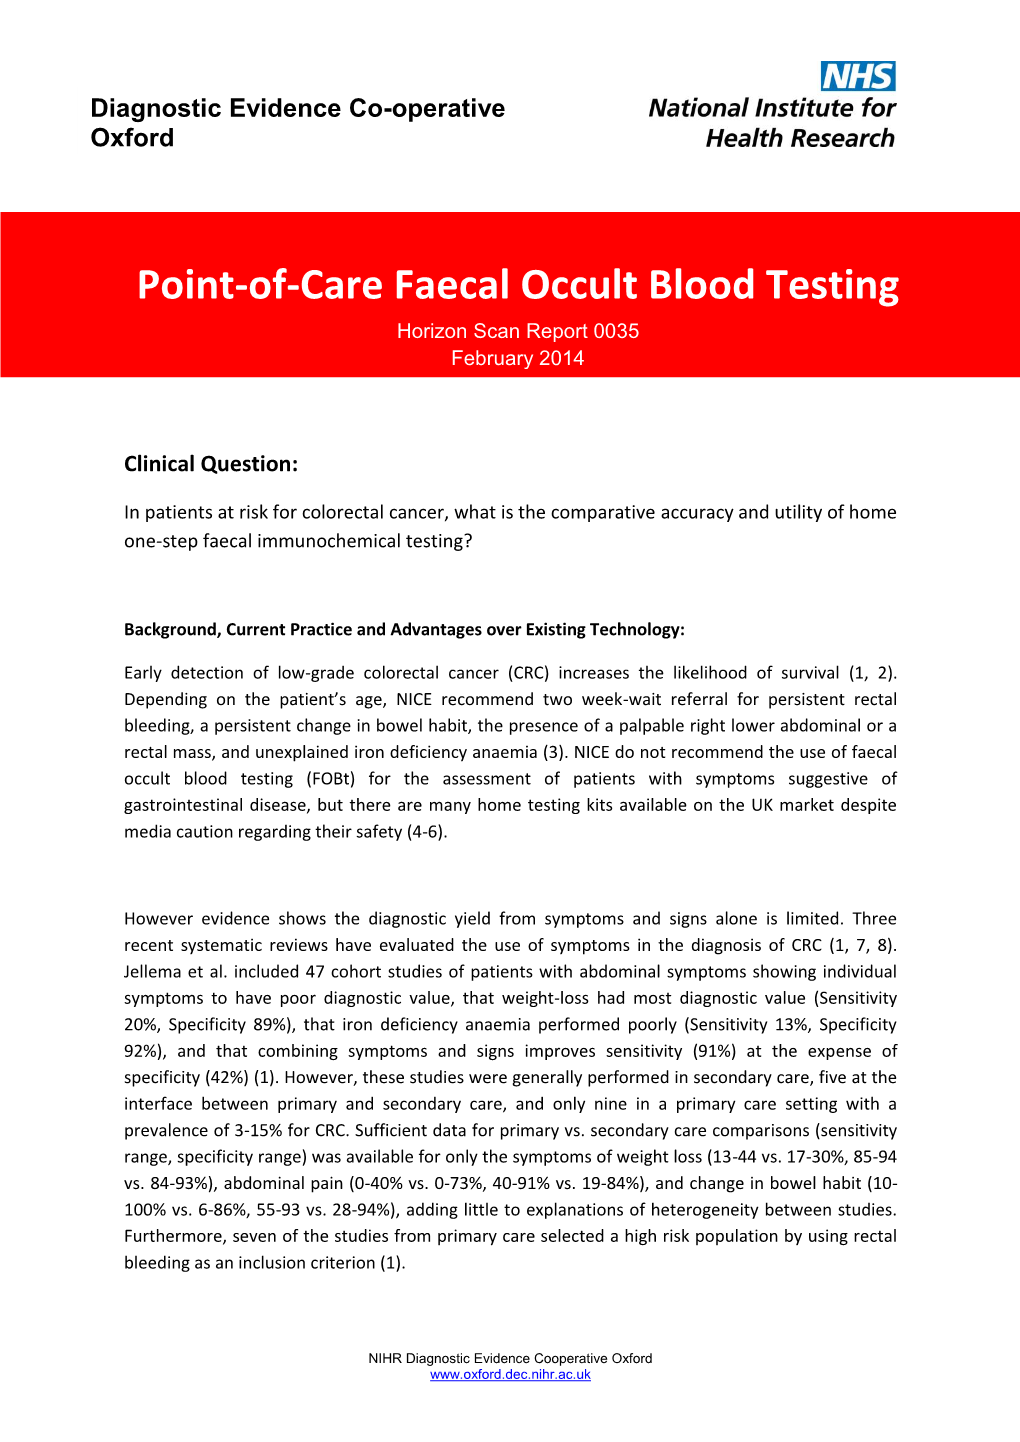 Point-Of-Care Faecal Occult Blood Testing Horizon Scan Report 0035 February 2014